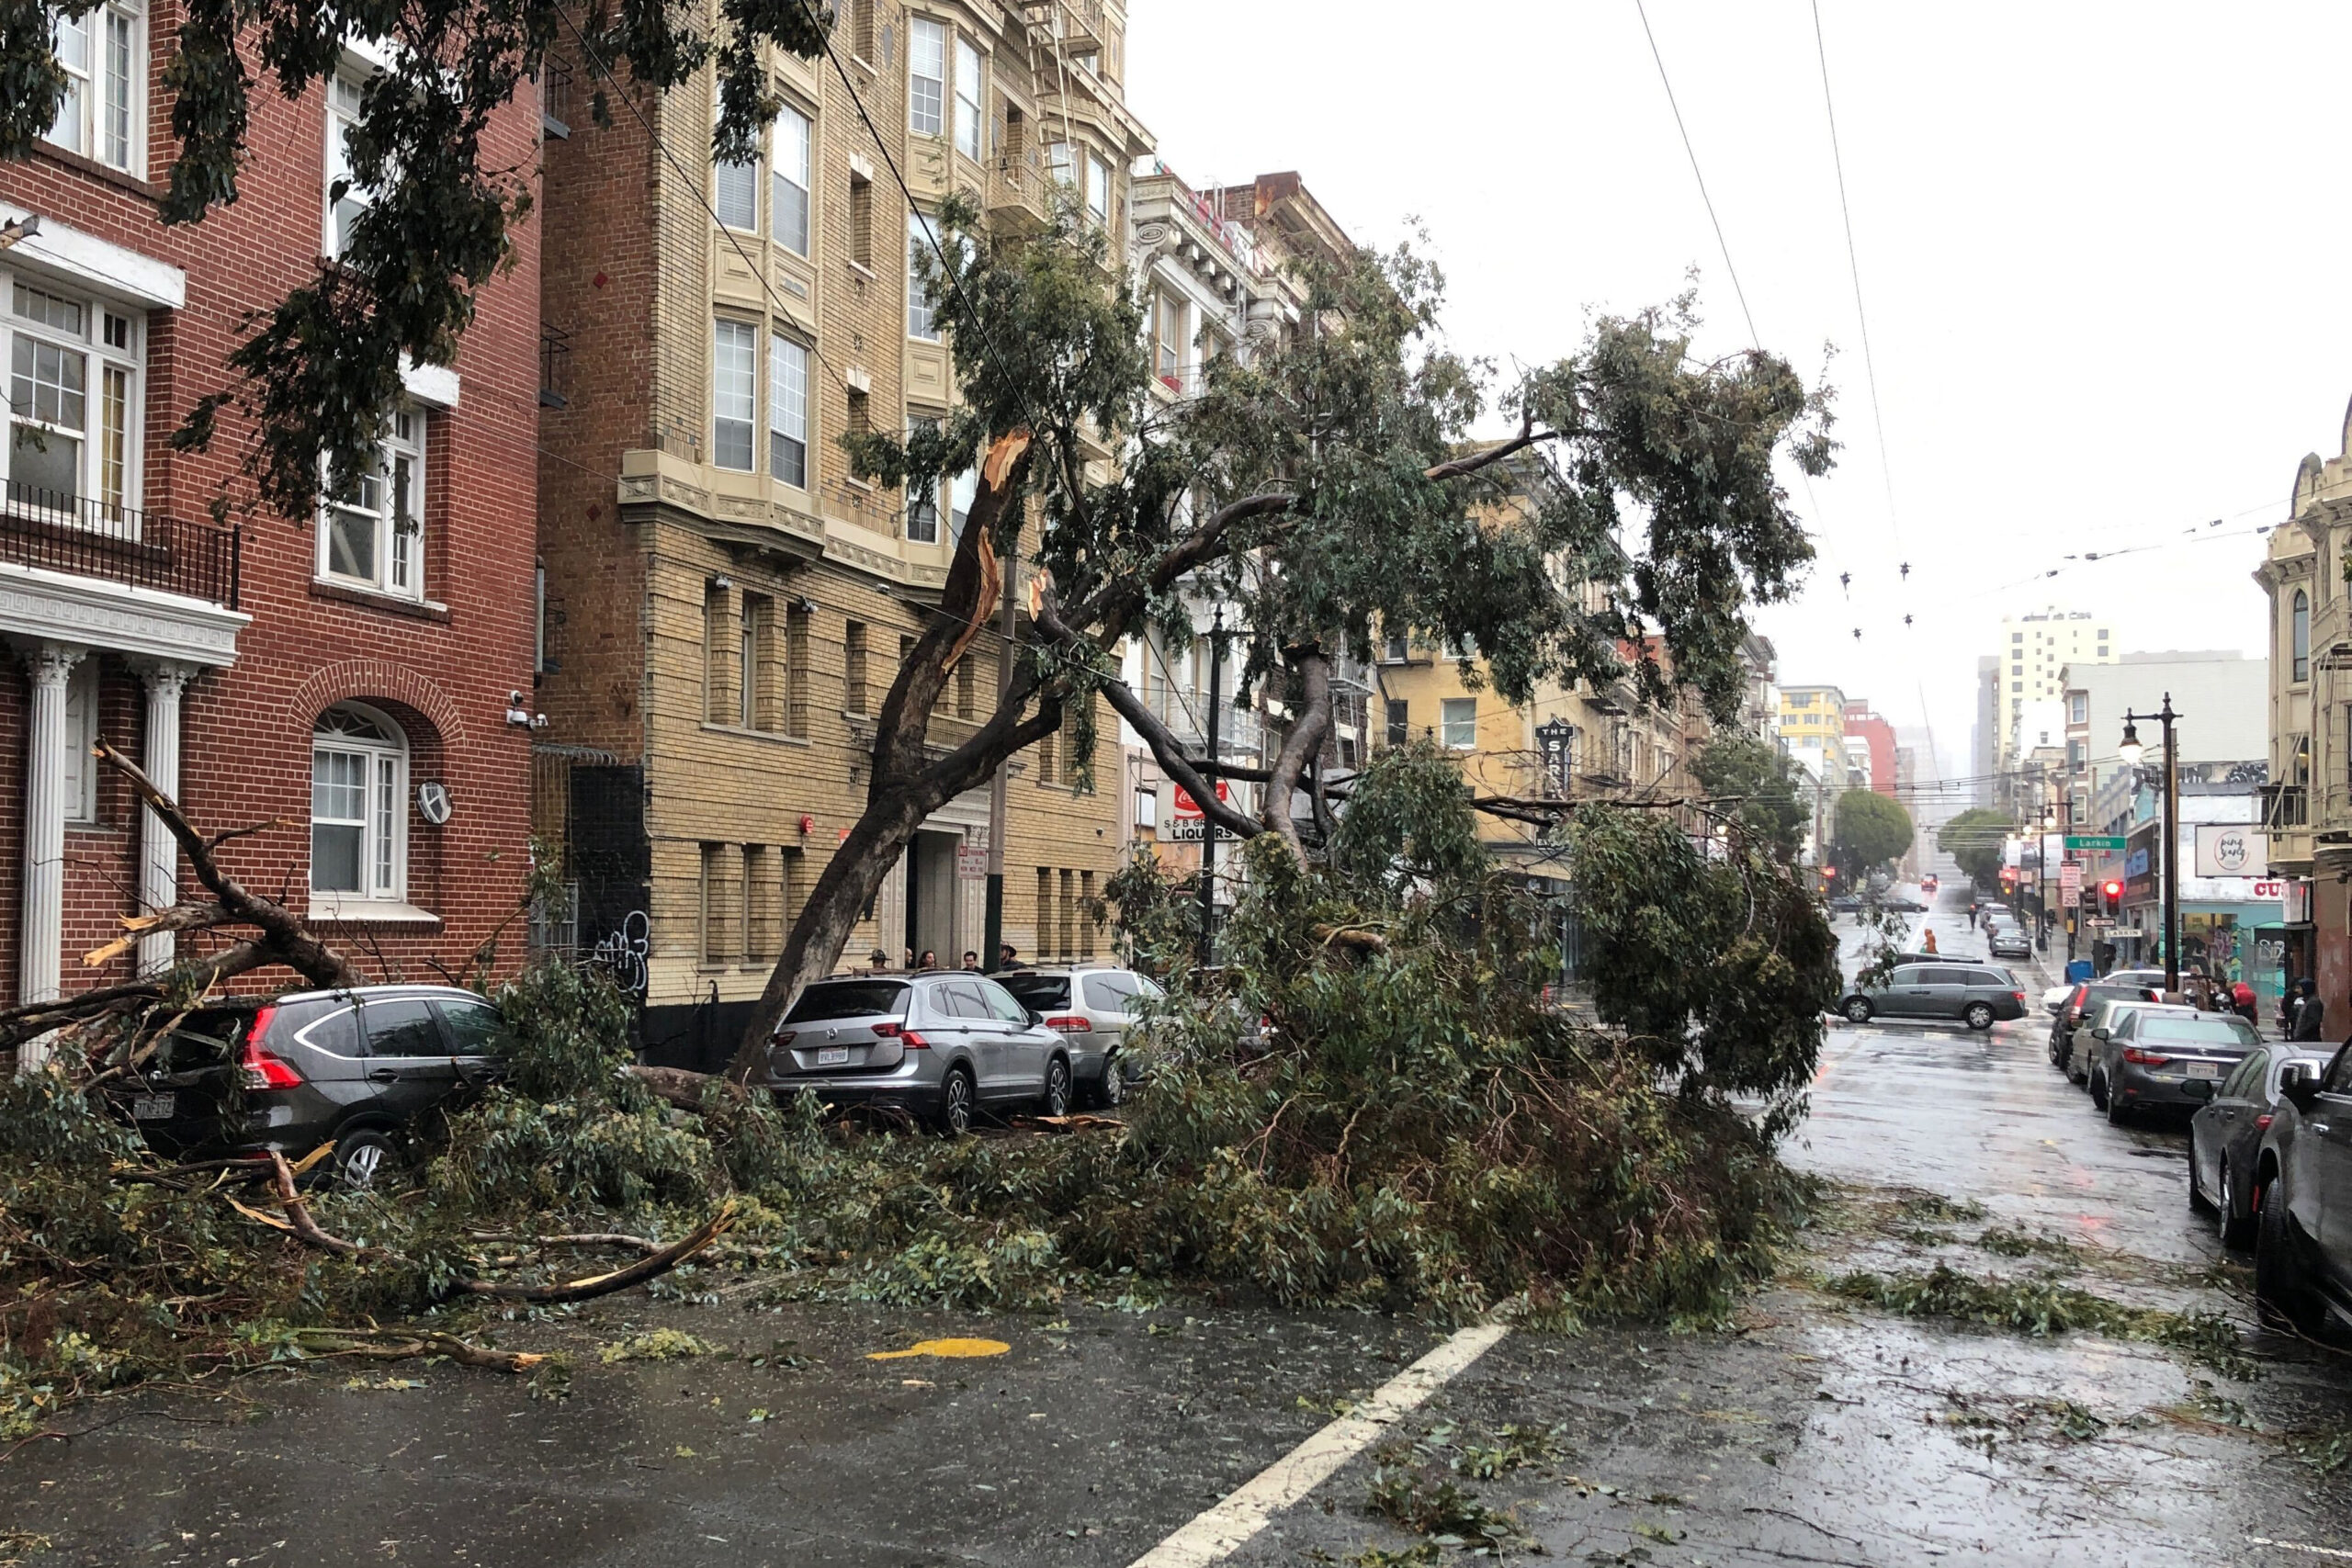 A large uprooted tree lies across a wet urban street, with parked cars and buildings on either side.